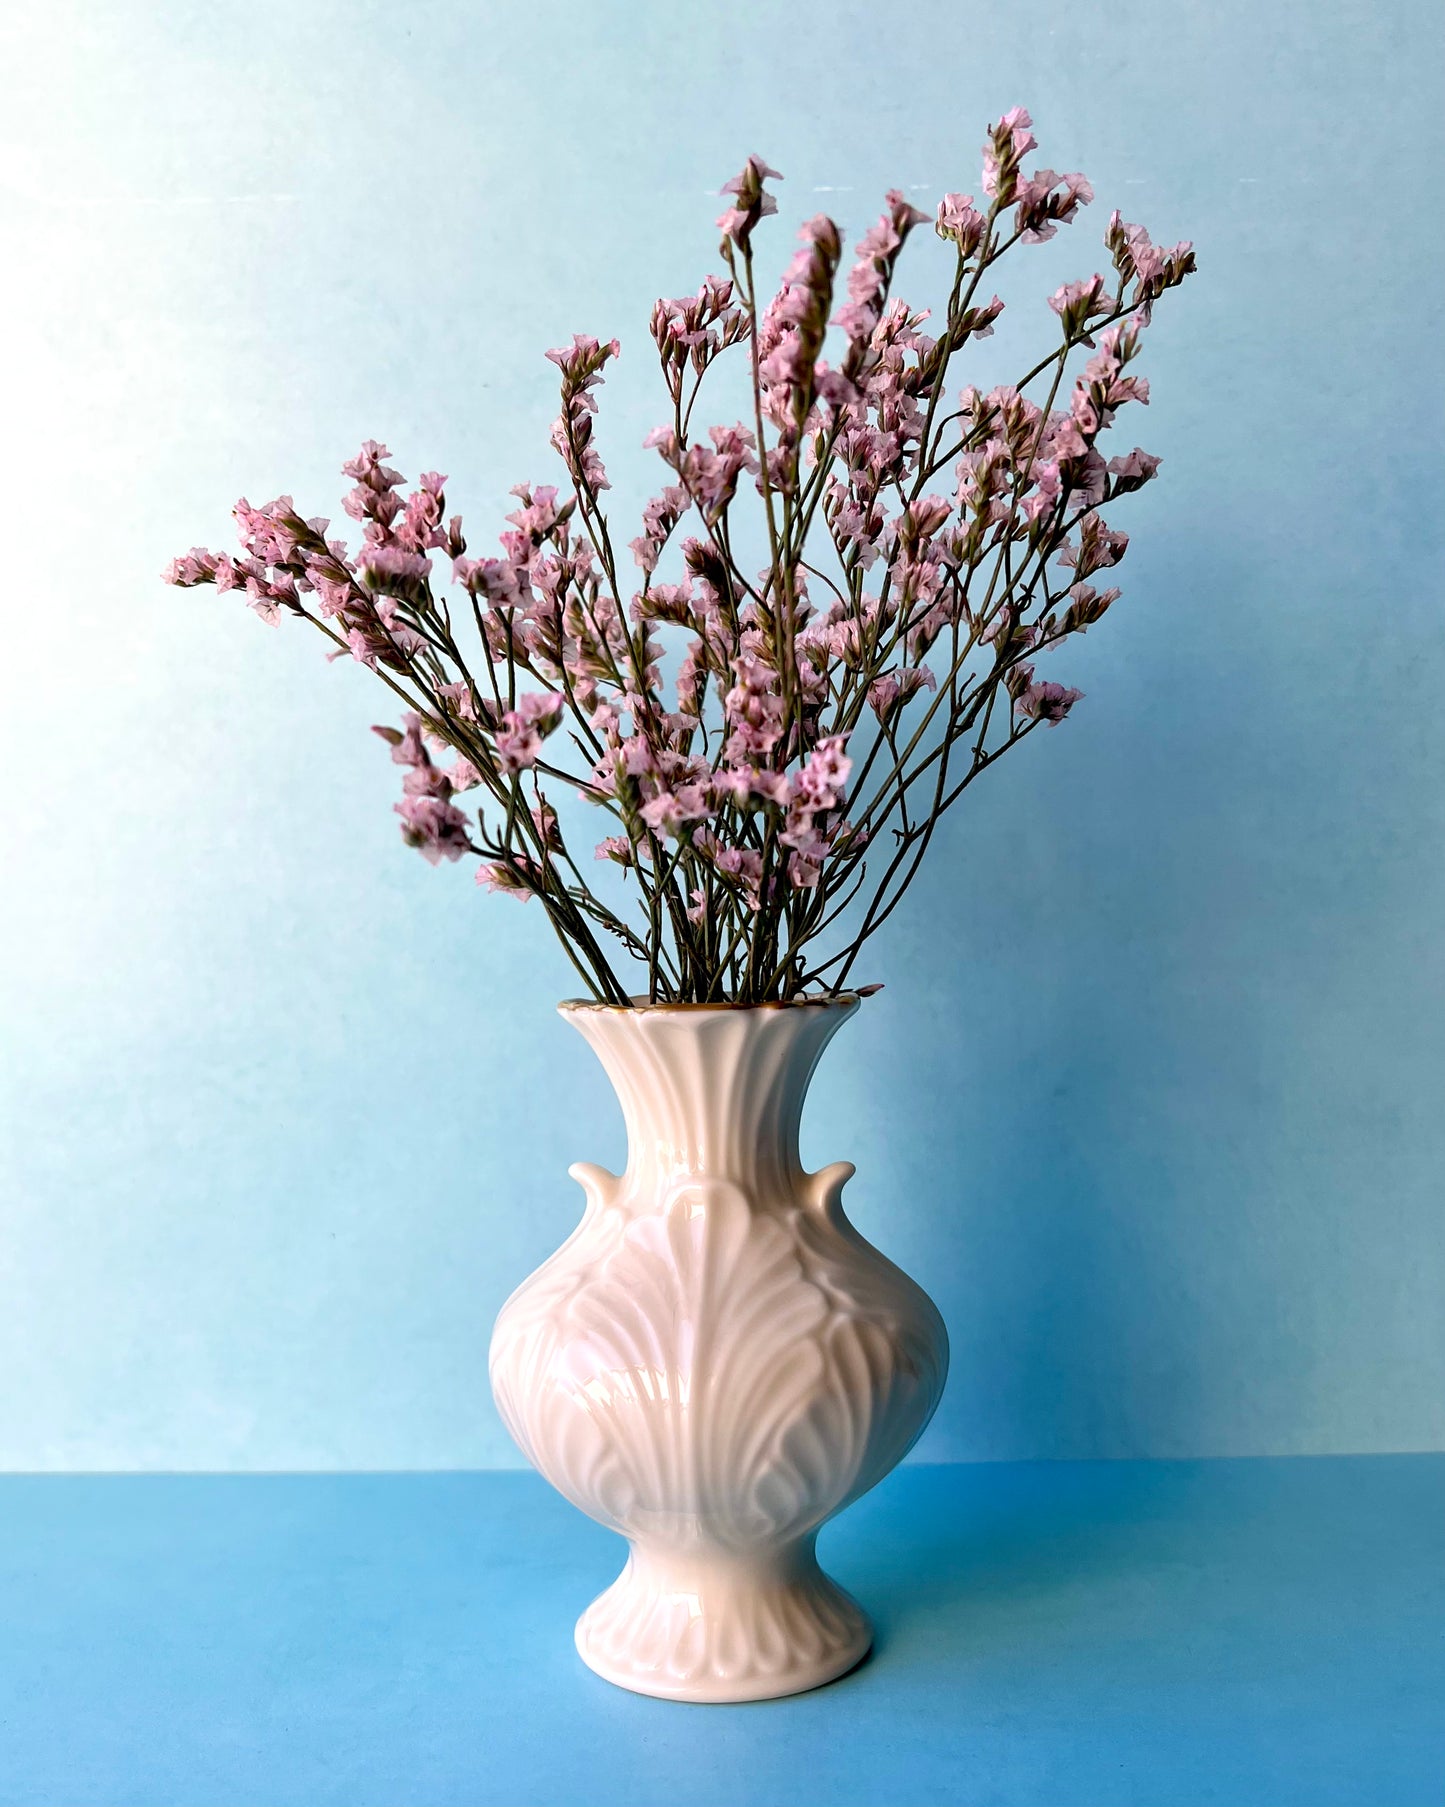 The vintage bud vase filled with little pink flowers